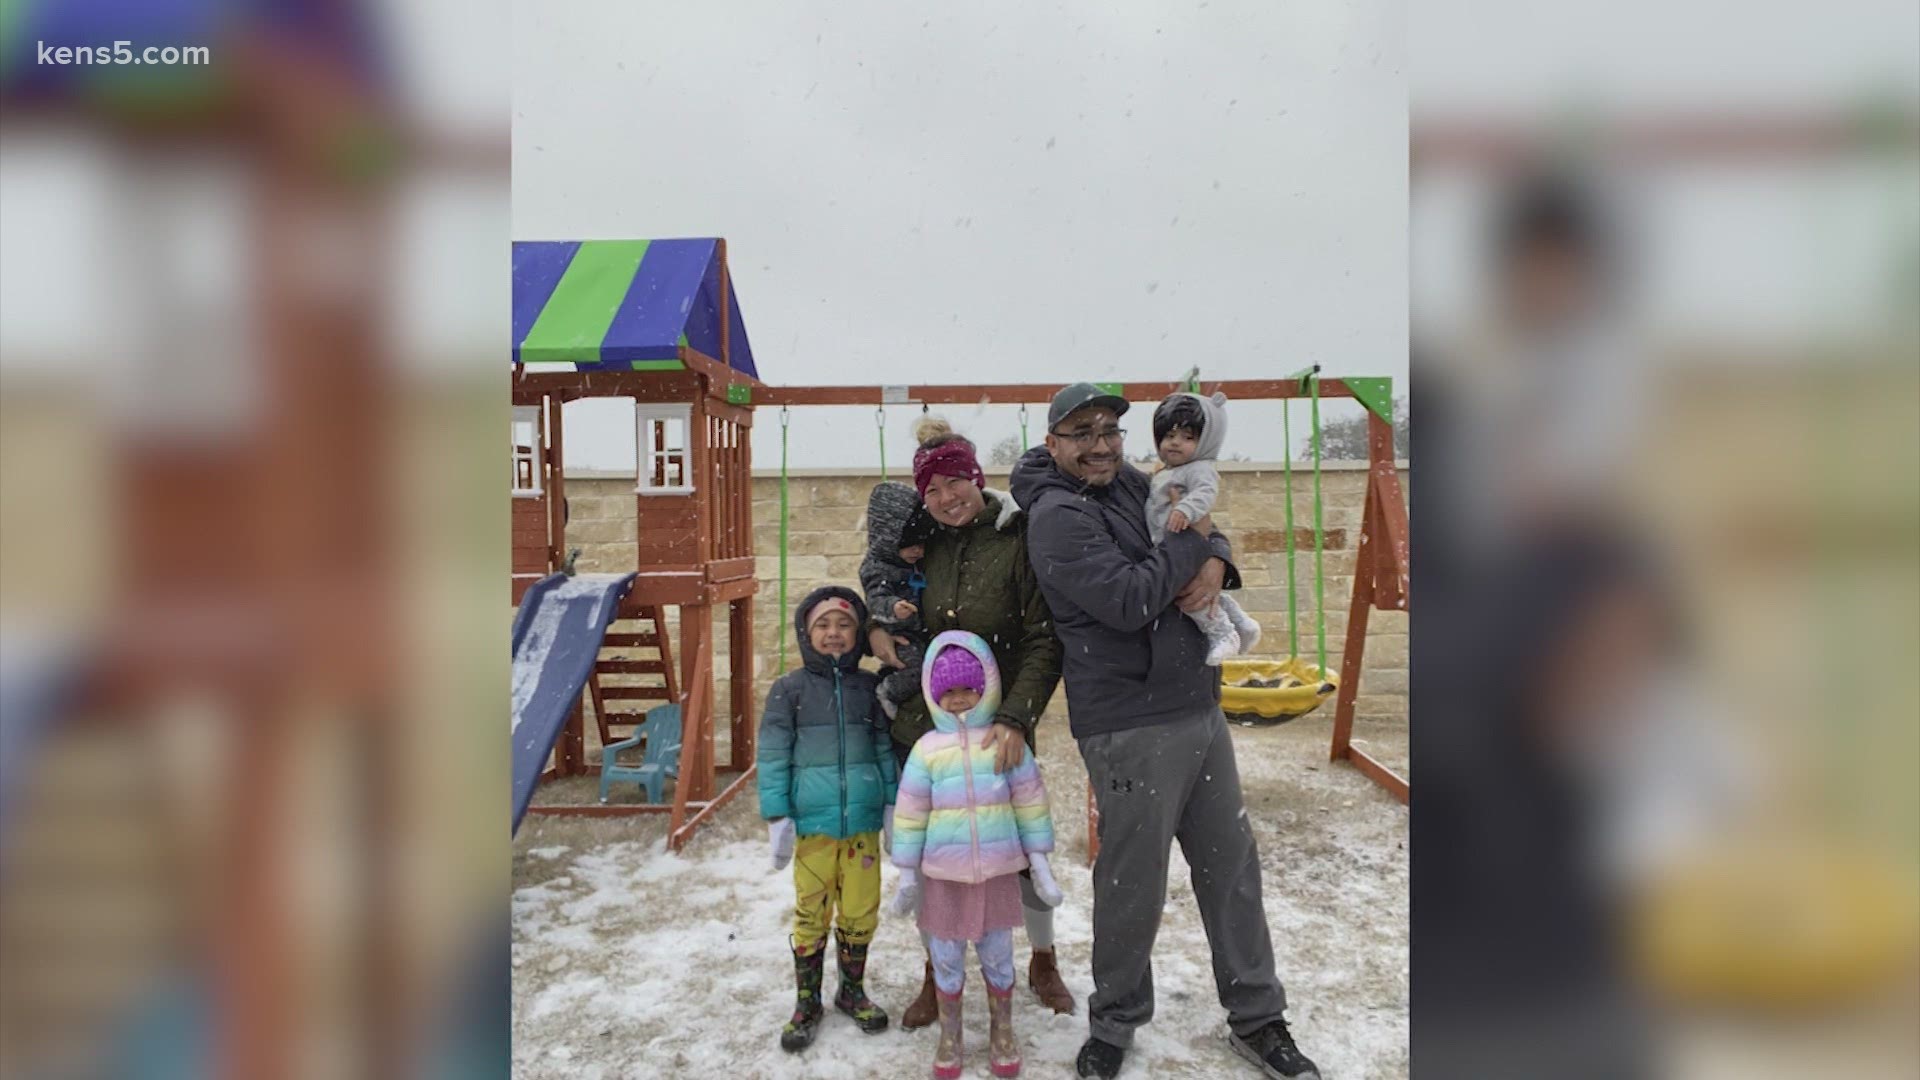 During the winter storm, the Valdez family's scheduled babysitting of their nephew got extended for five days. Their experience went viral.